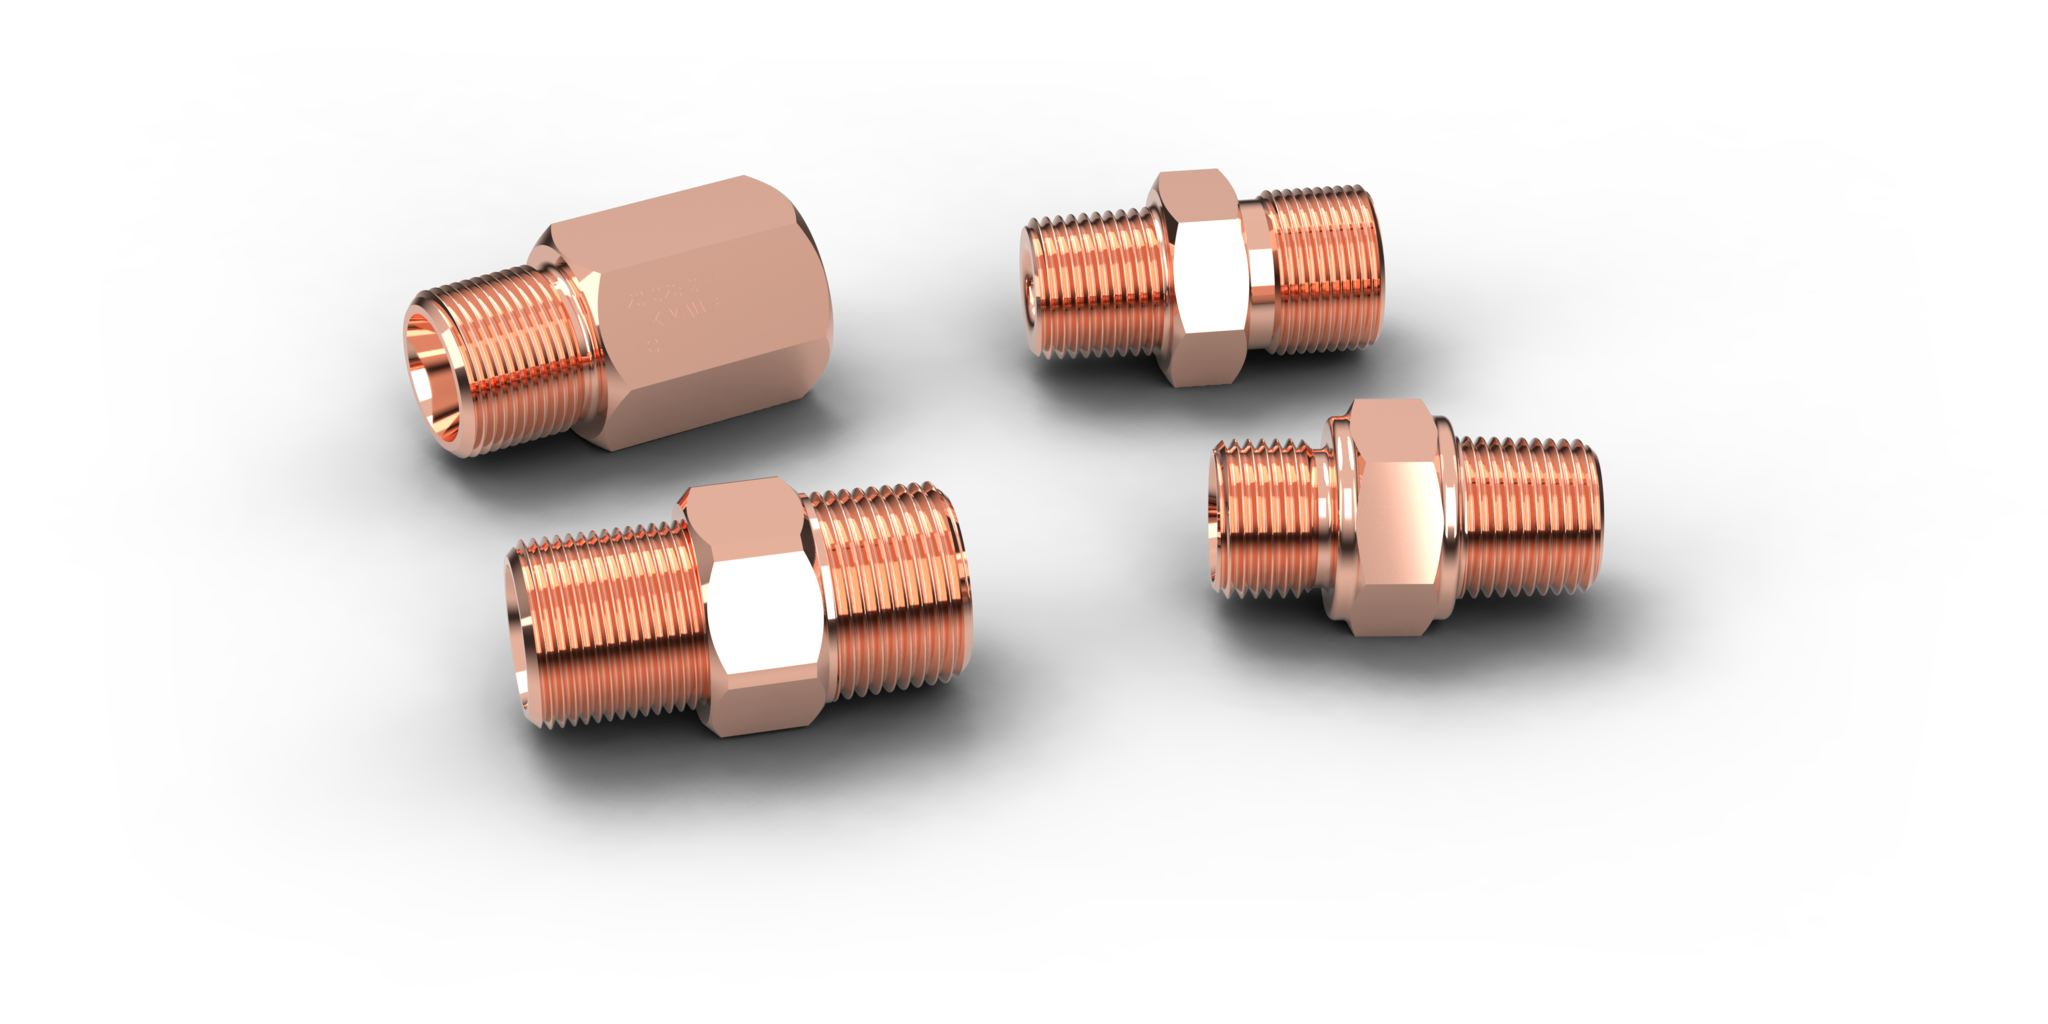 15-26k-psi-metric-bspp-to-npt-adapters-advanced-pressure-systems